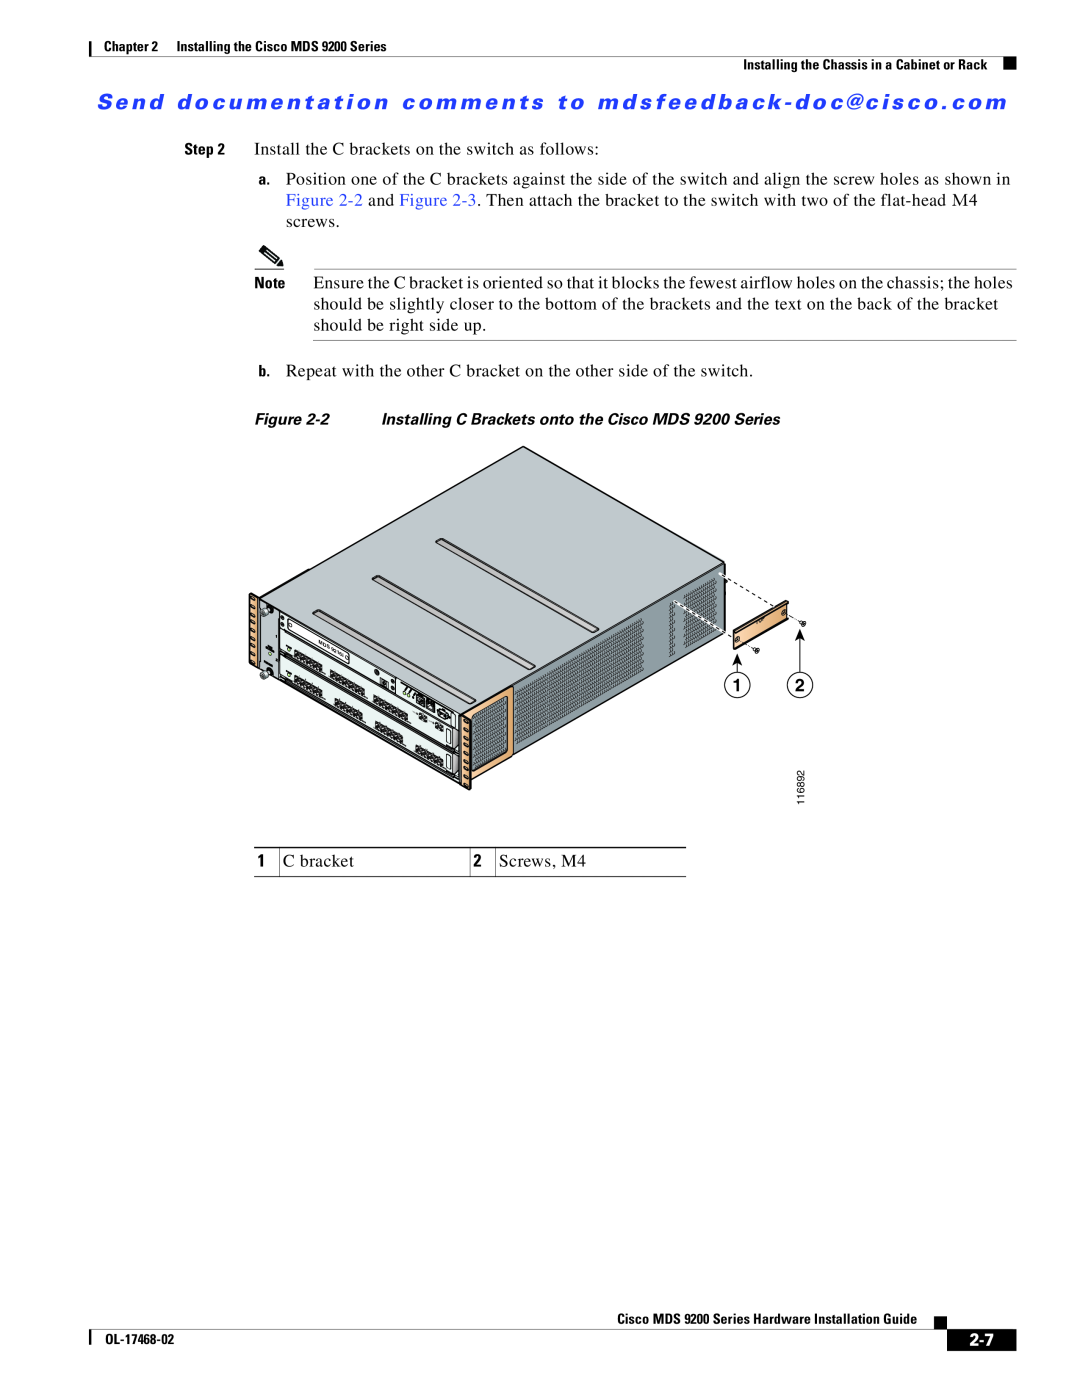 Cisco Systems manual 2 Installing C Brackets onto the Cisco MDS 9200 Series 